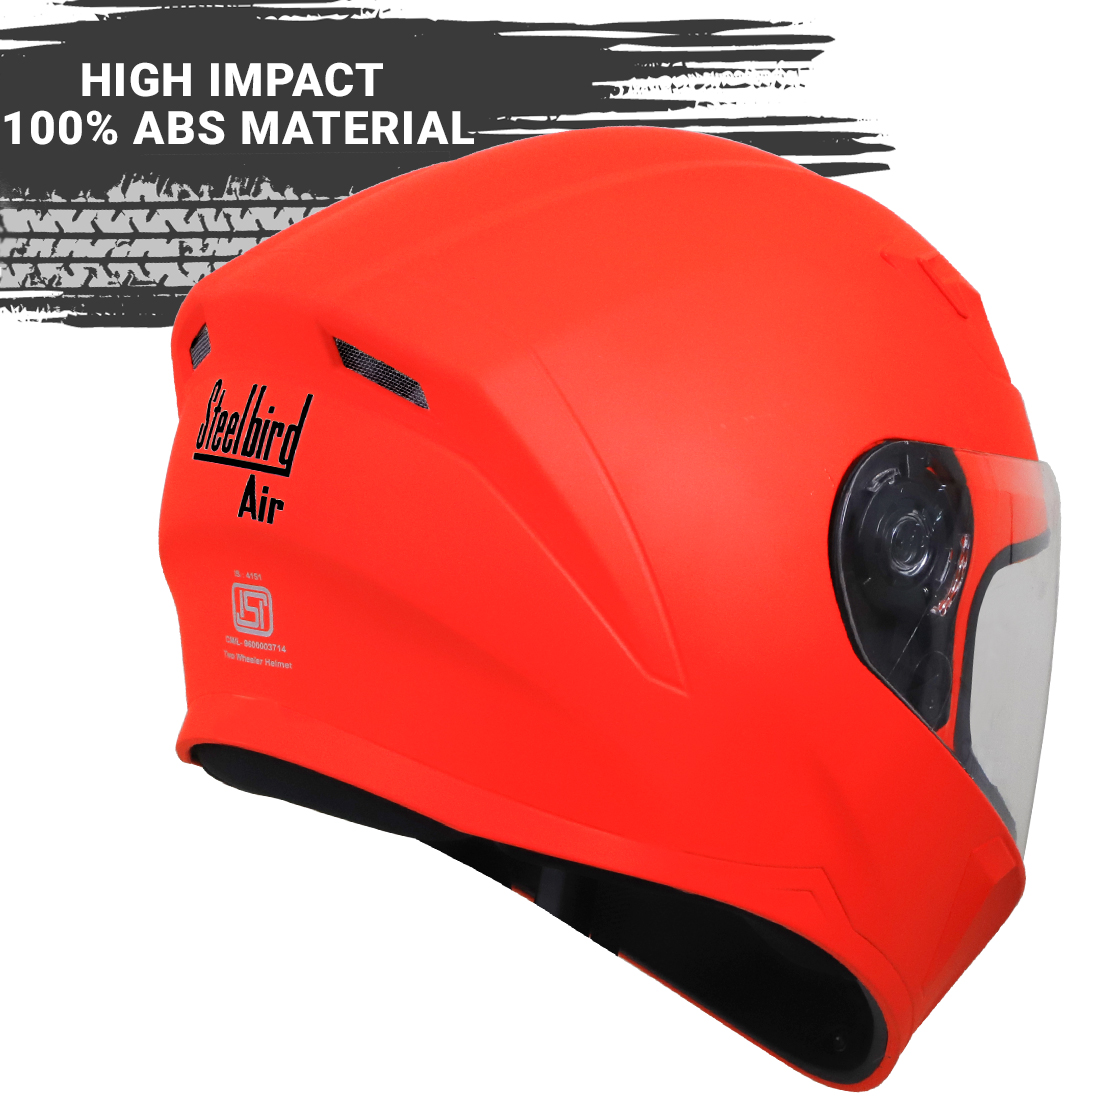 Steelbird SBA-21 GT Full Face ISI Certified Helmet With Inner Chrome Silver Sun Shield And Outer Clear Visor (Glossy Fluo Red)